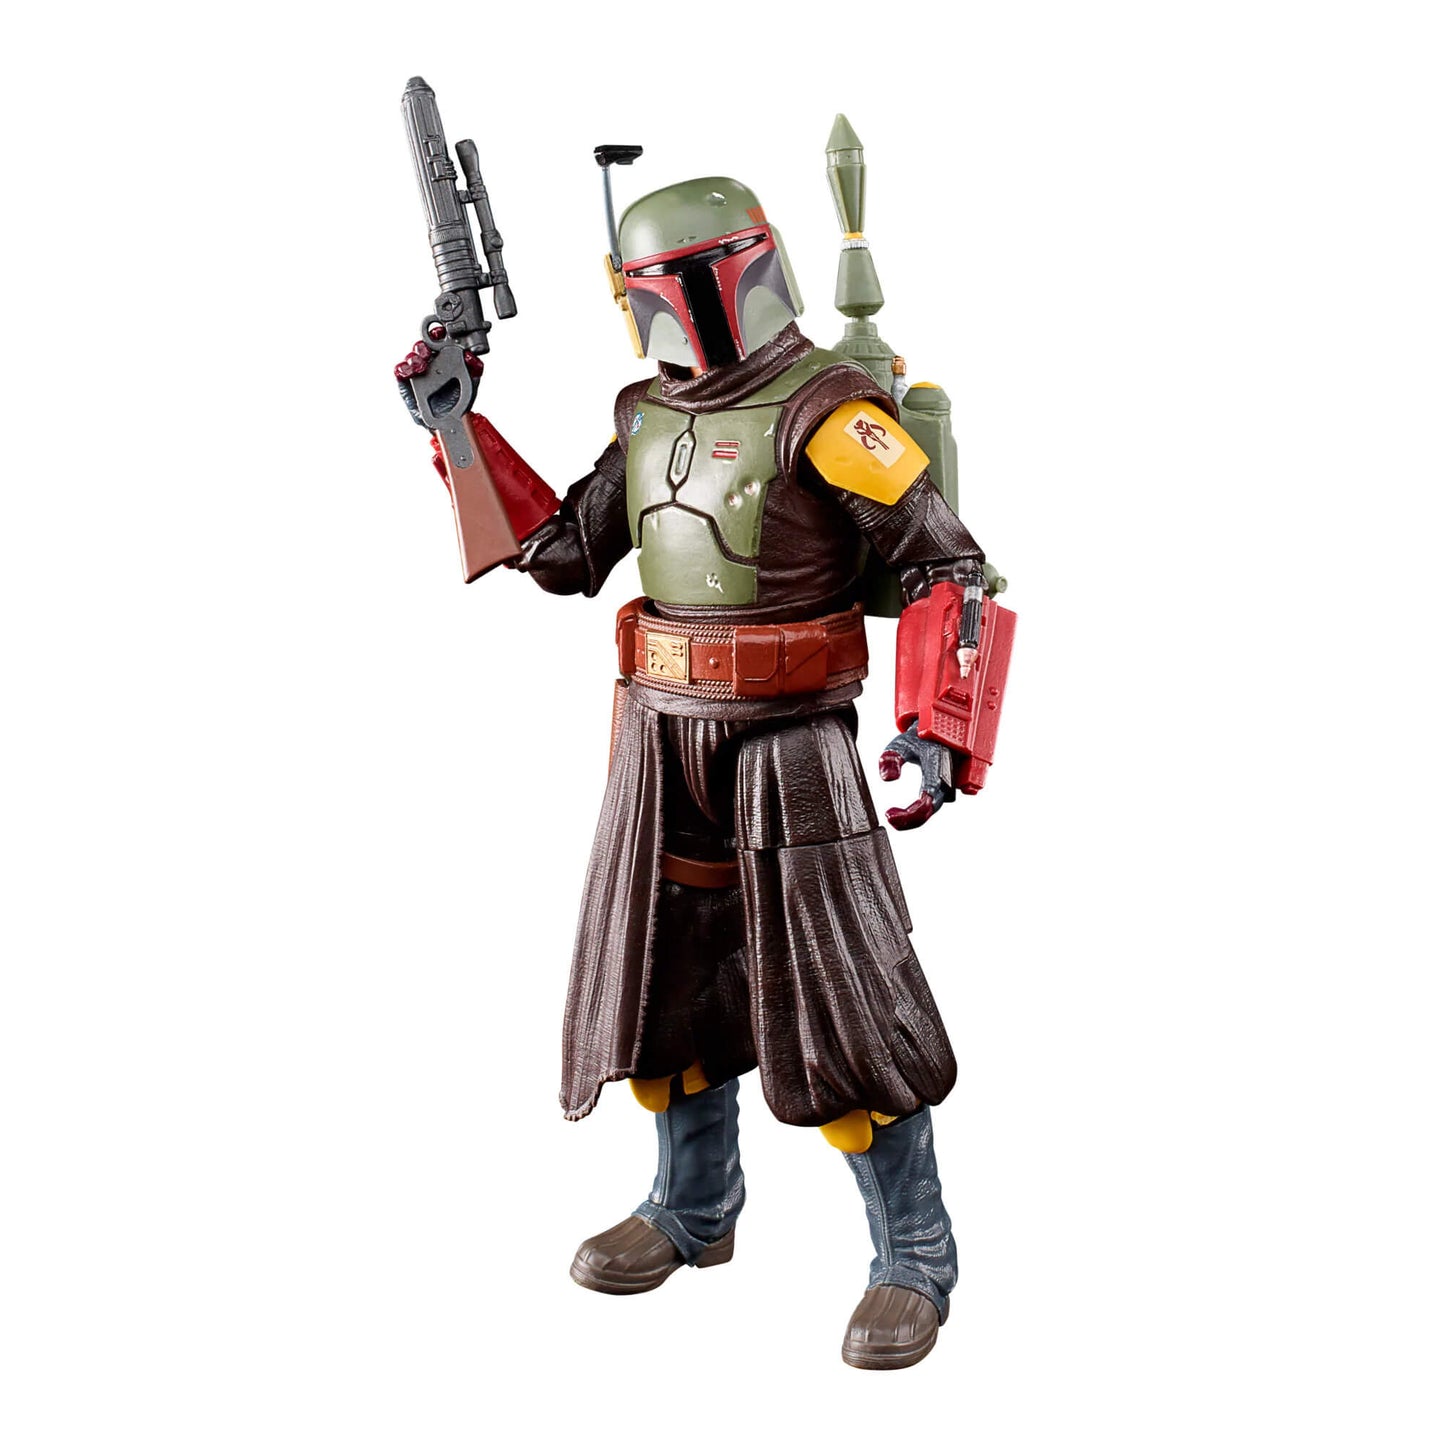 Hasbro Disney Plus Book of Boba Fett Star Wars The Black Series Boba Fett Throne Room action figure with accessories